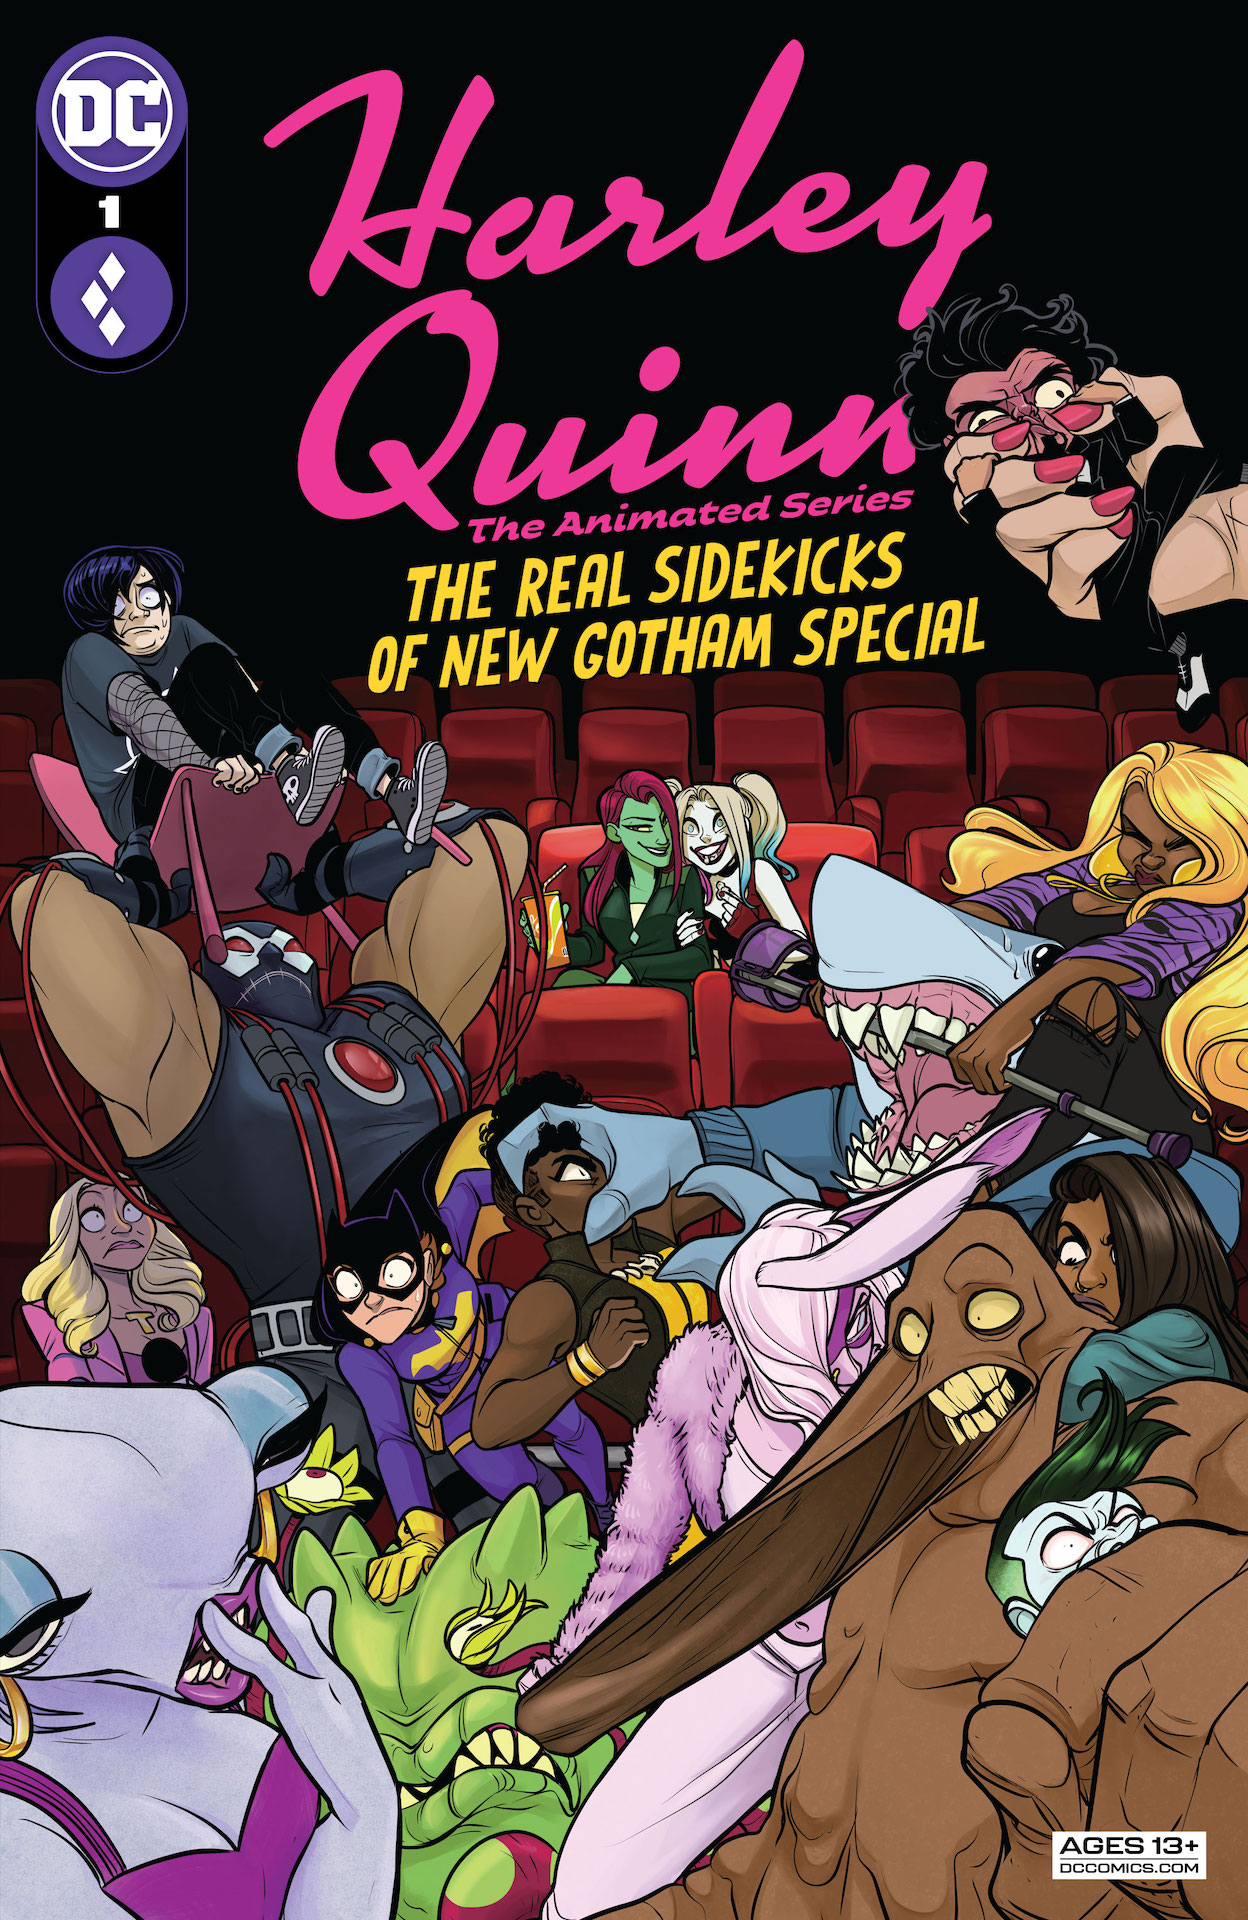 DC Preview: Harley Quinn: The Animated Series - The Real Sidekicks of New Gotham Special #1